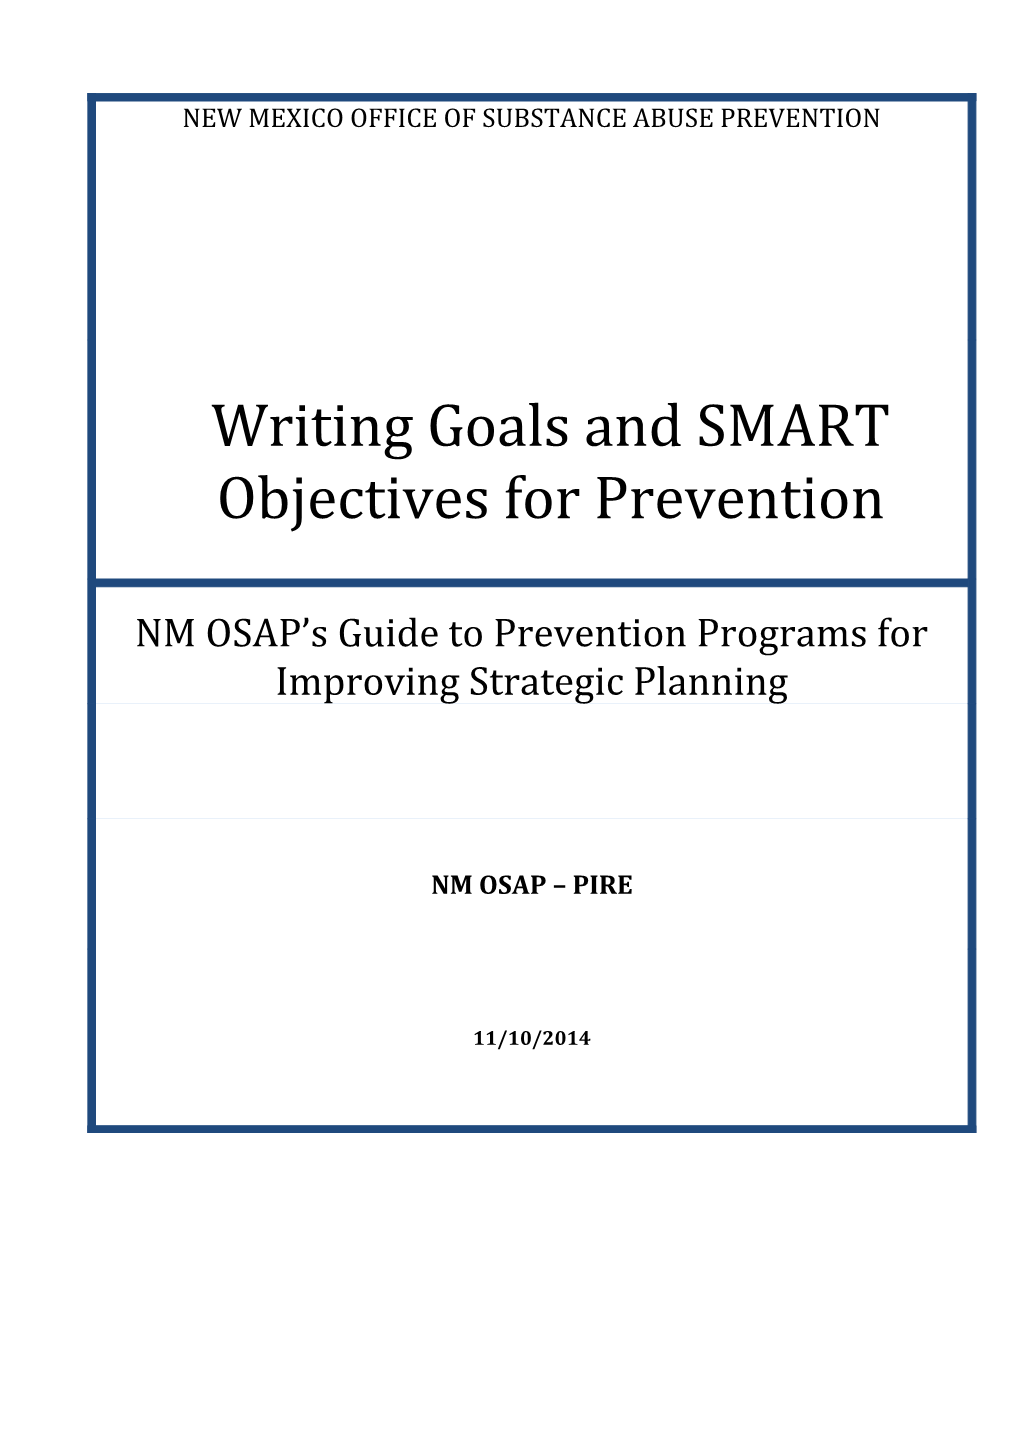 Writing Goals and SMART Objectives for Prevention